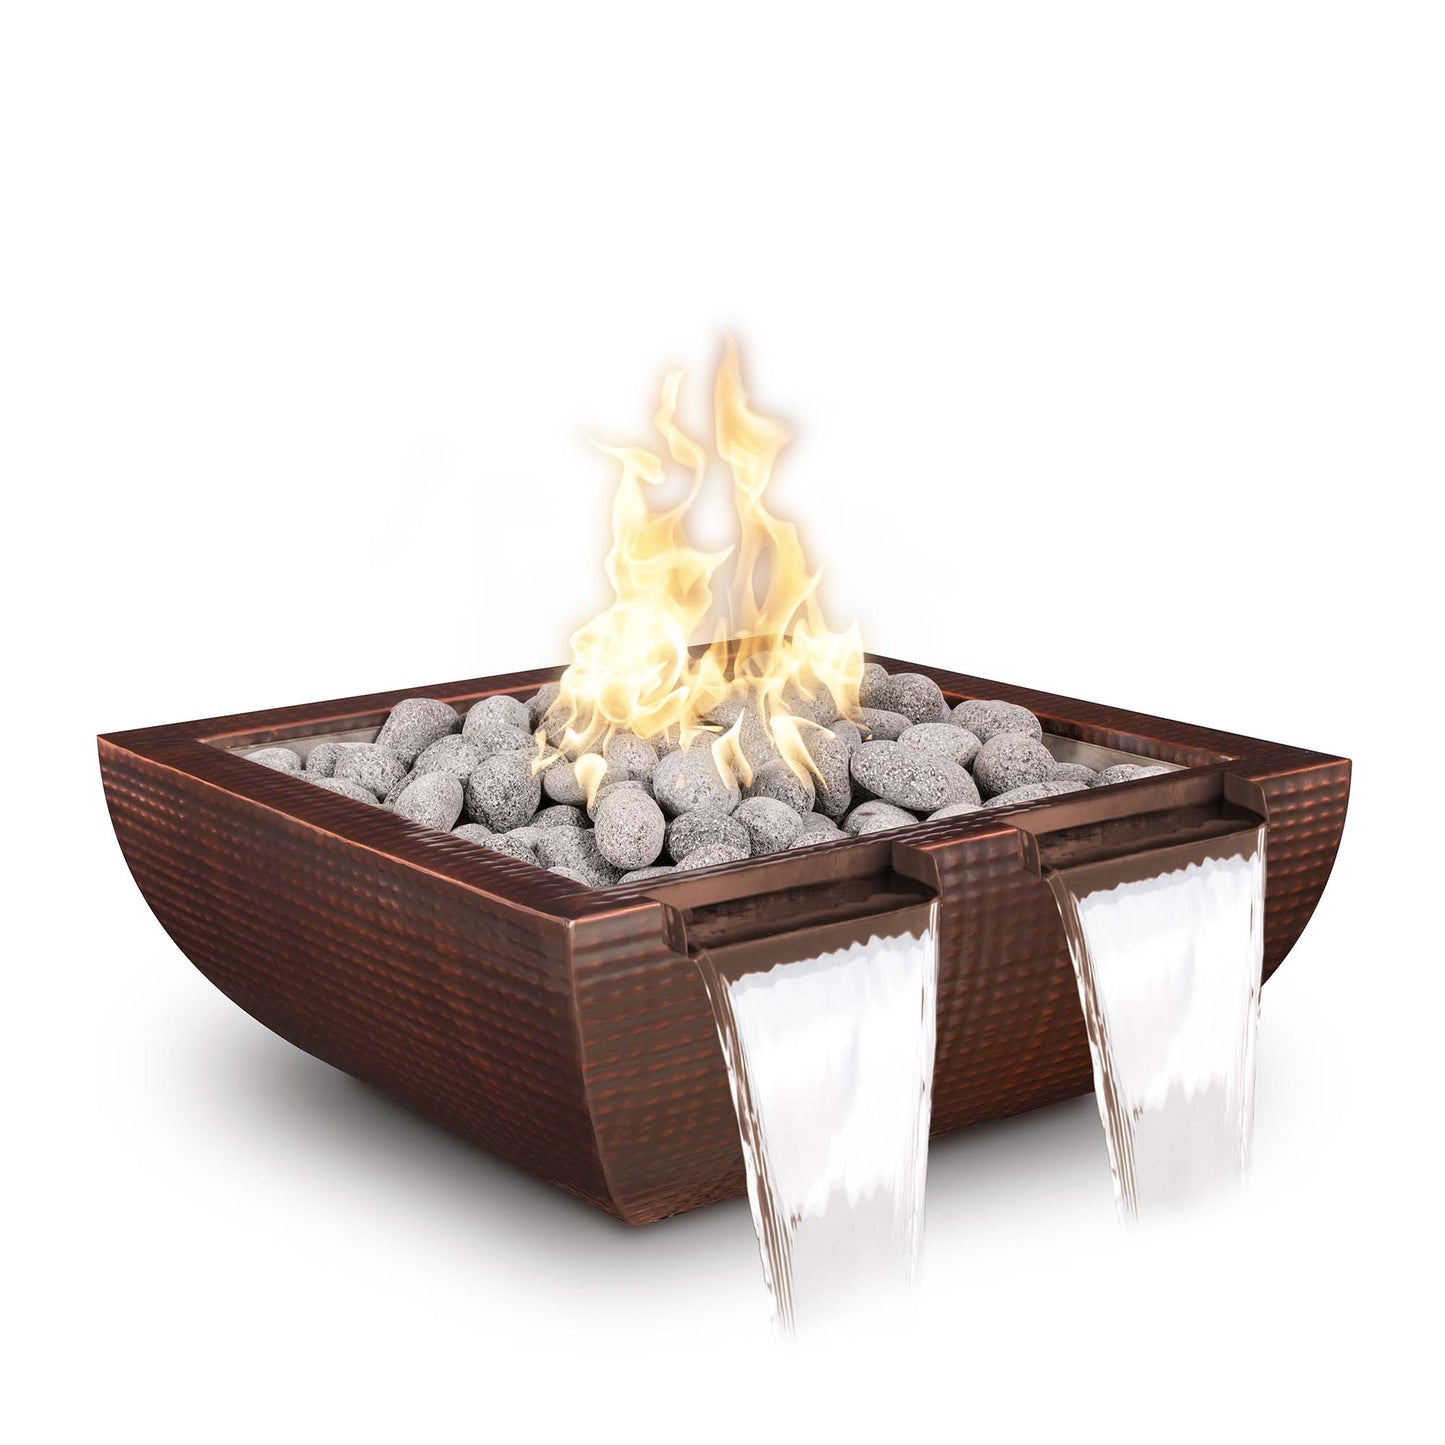 The Outdoor Plus Avalon Twin Spill 36" Black Powder Coated Metal Liquid Propane Fire & Water Bowl with Match Lit with Flame Sense Ignition